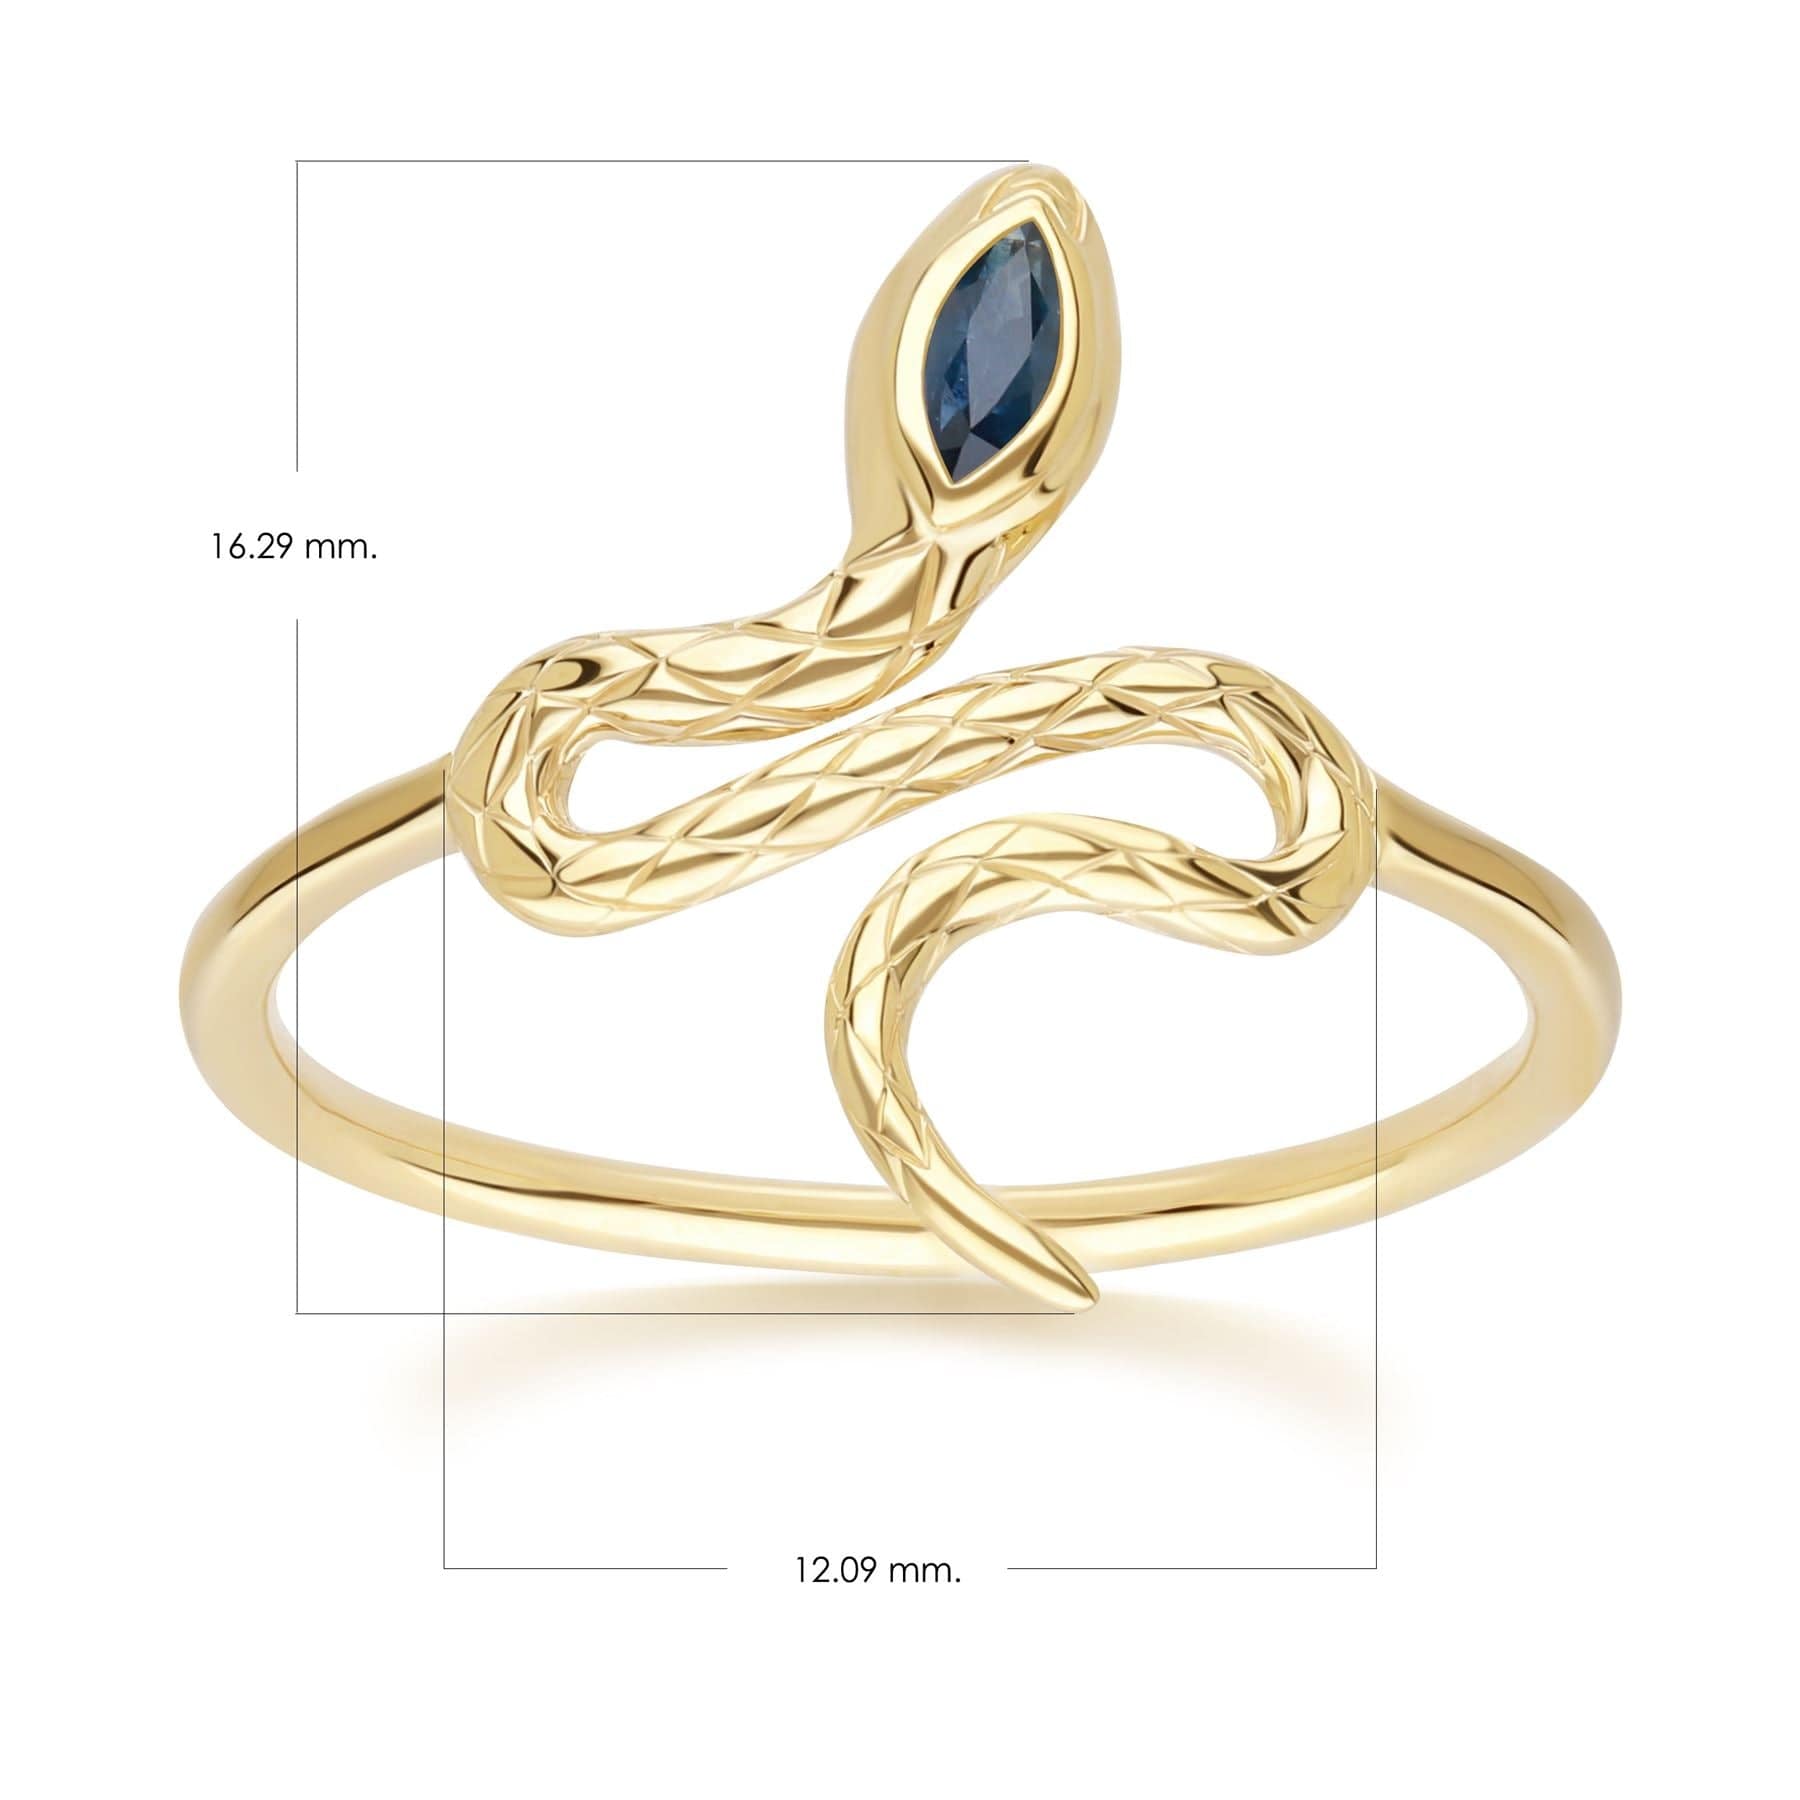 132R8457039 ECFEW™ Sapphire Winding Snake Ring in 9ct Yellow Gold Dimensions